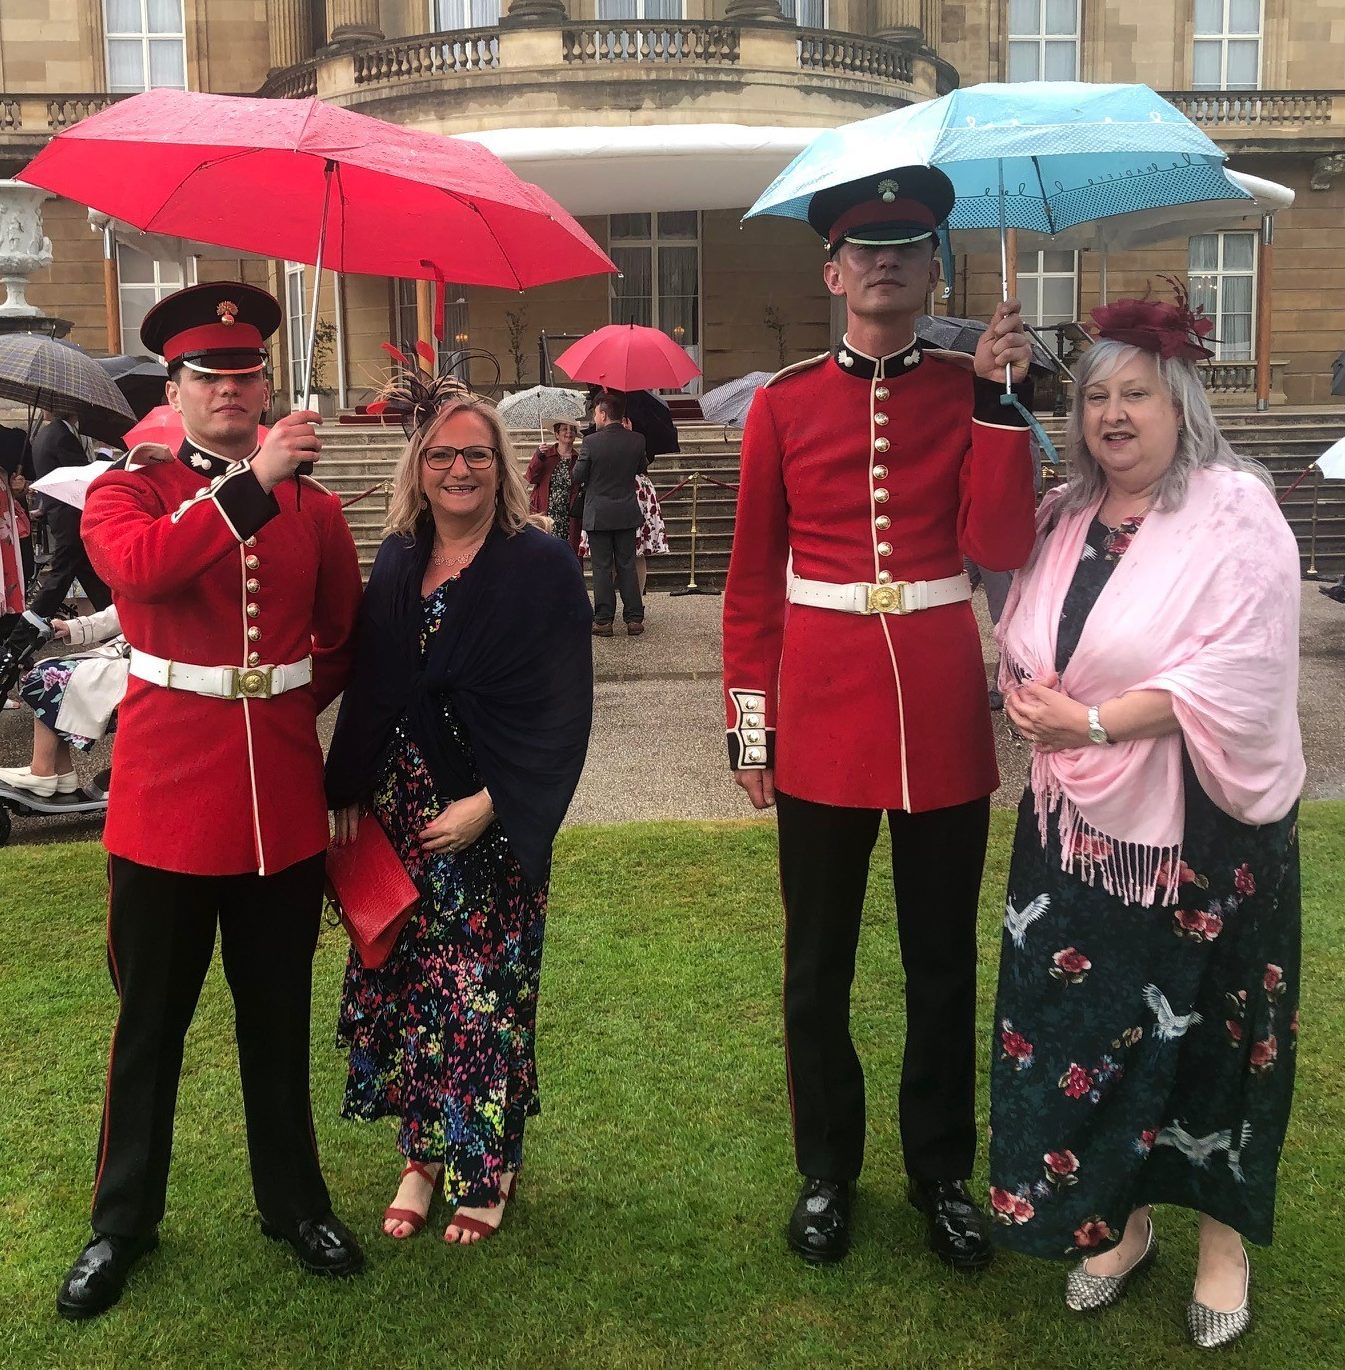 Sandra Ackroyd (left) and Angela Gregory (right) at Queens garden party wearing long, flowy dresses, shawls and fascinators, standing under umbrellas held by royal guards. 